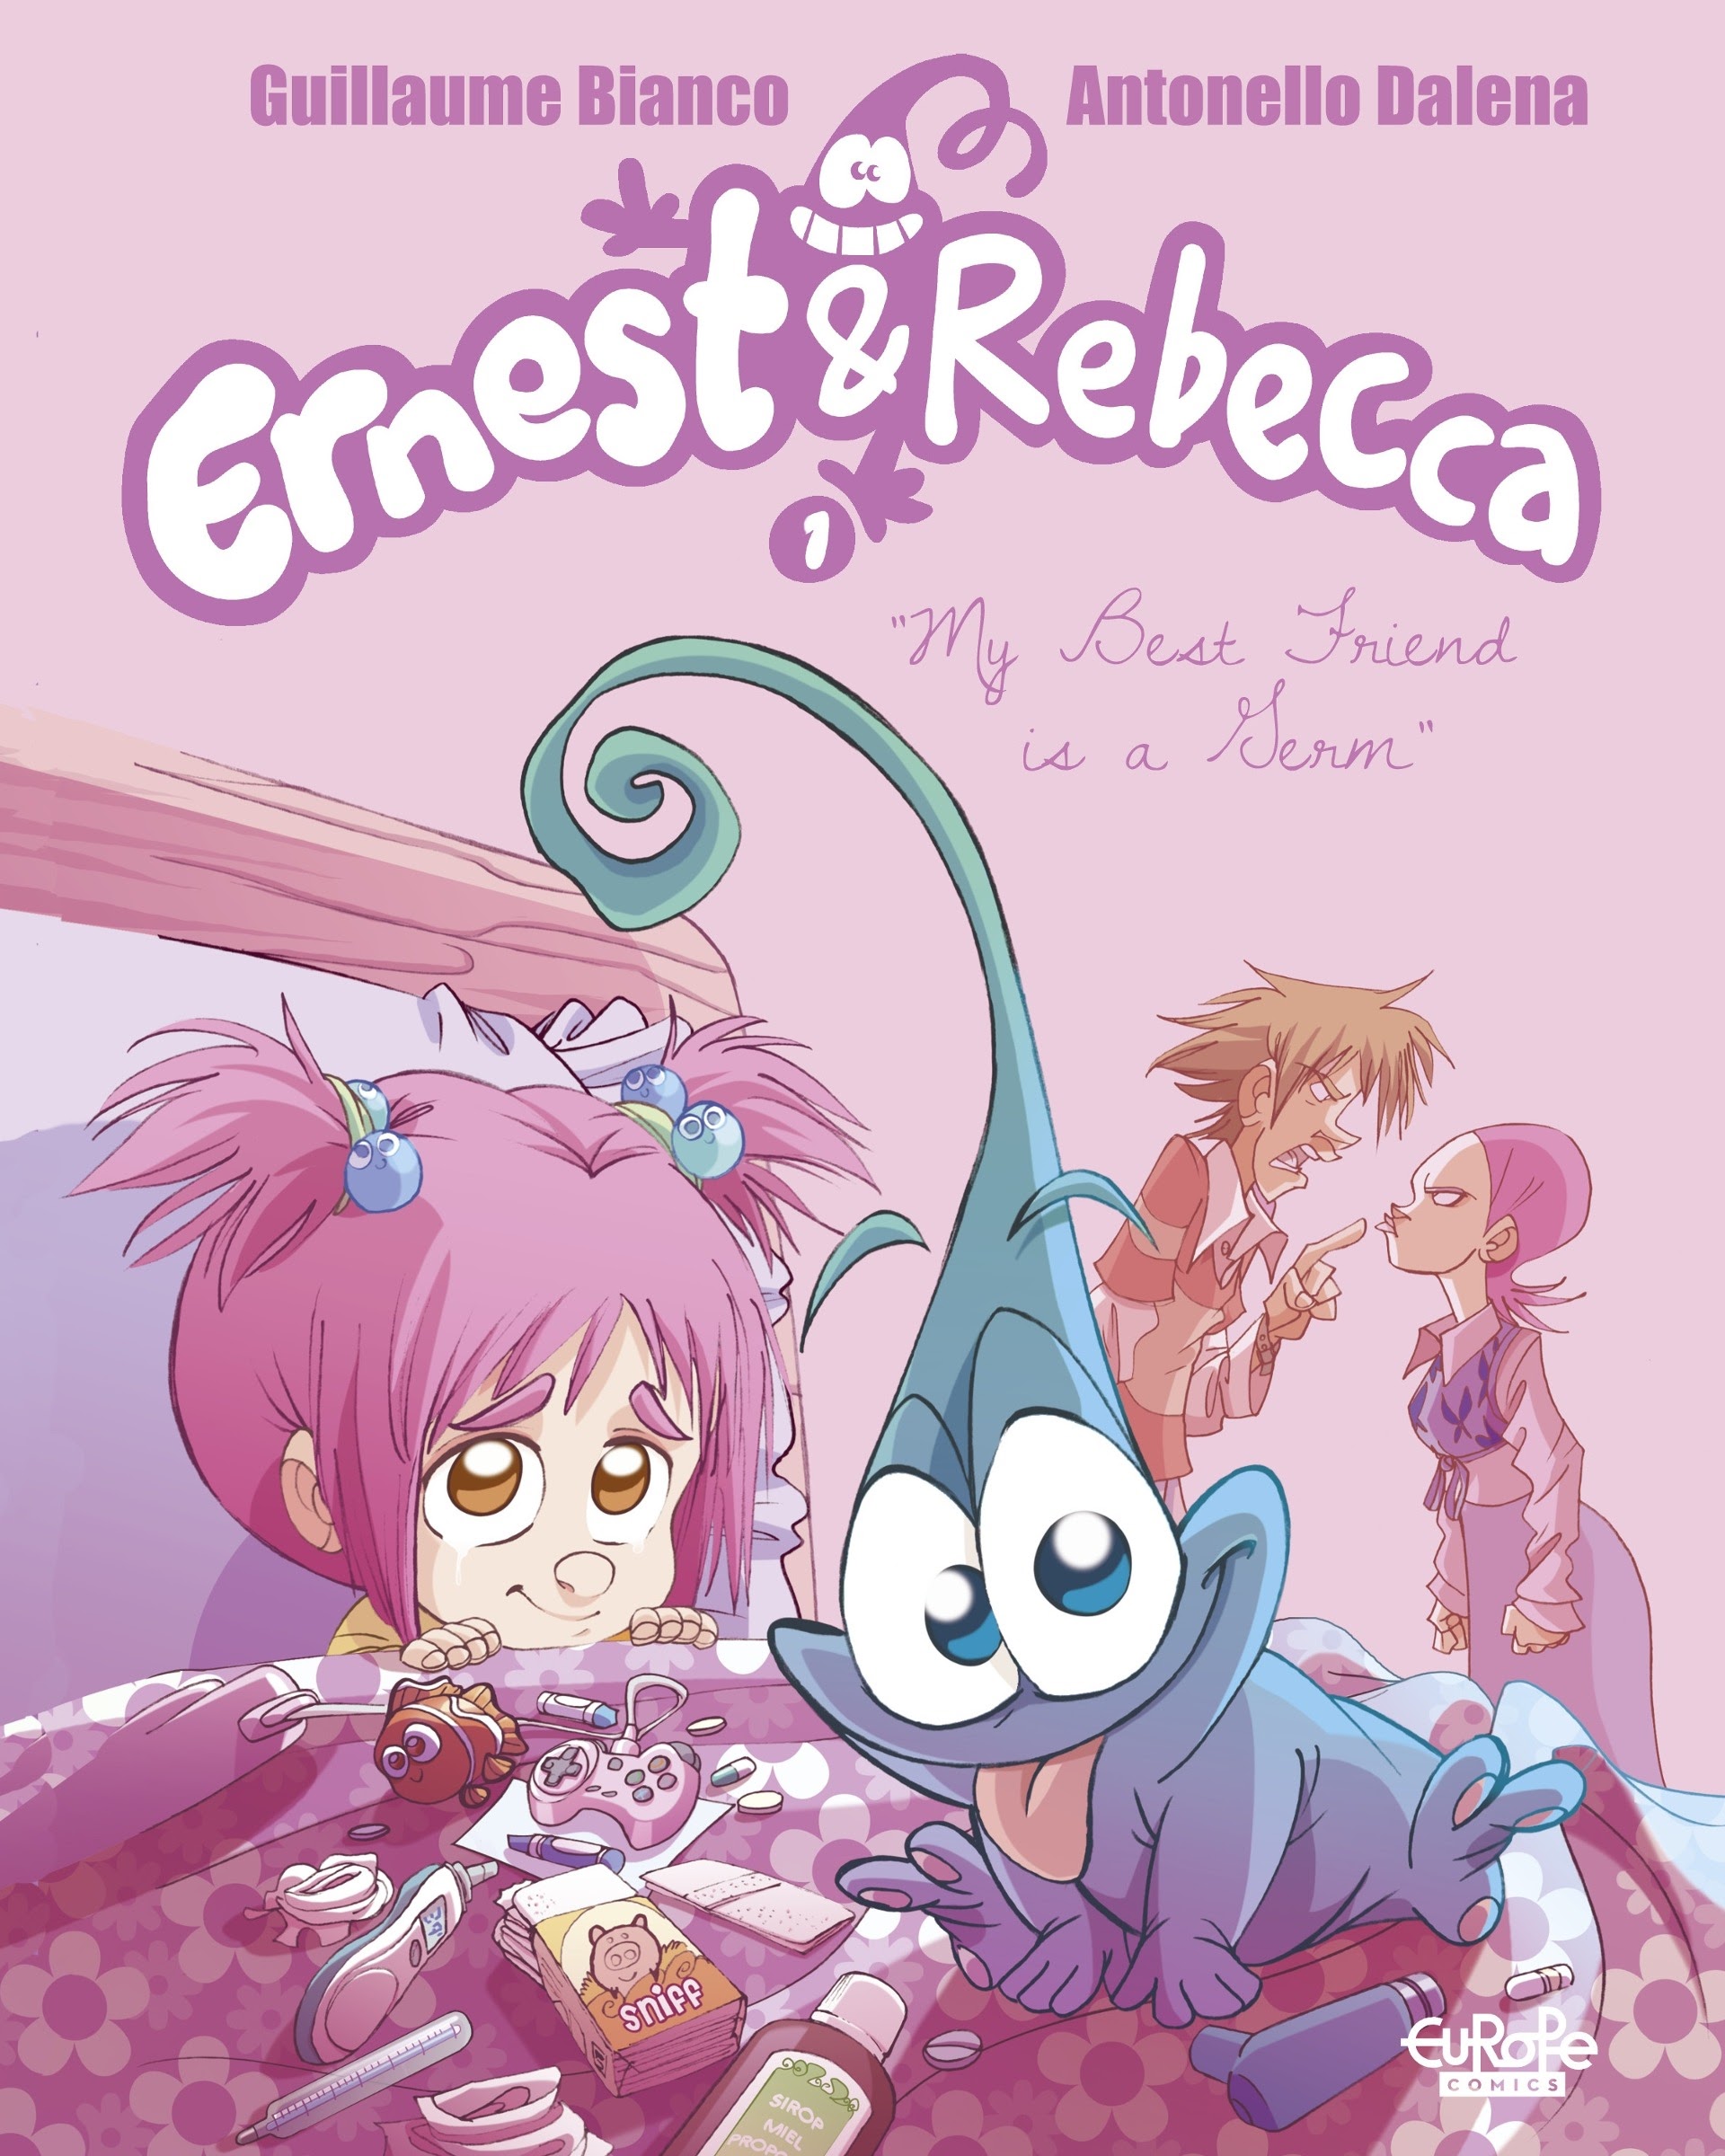 Read online Ernest & Rebecca comic -  Issue #1 - 1